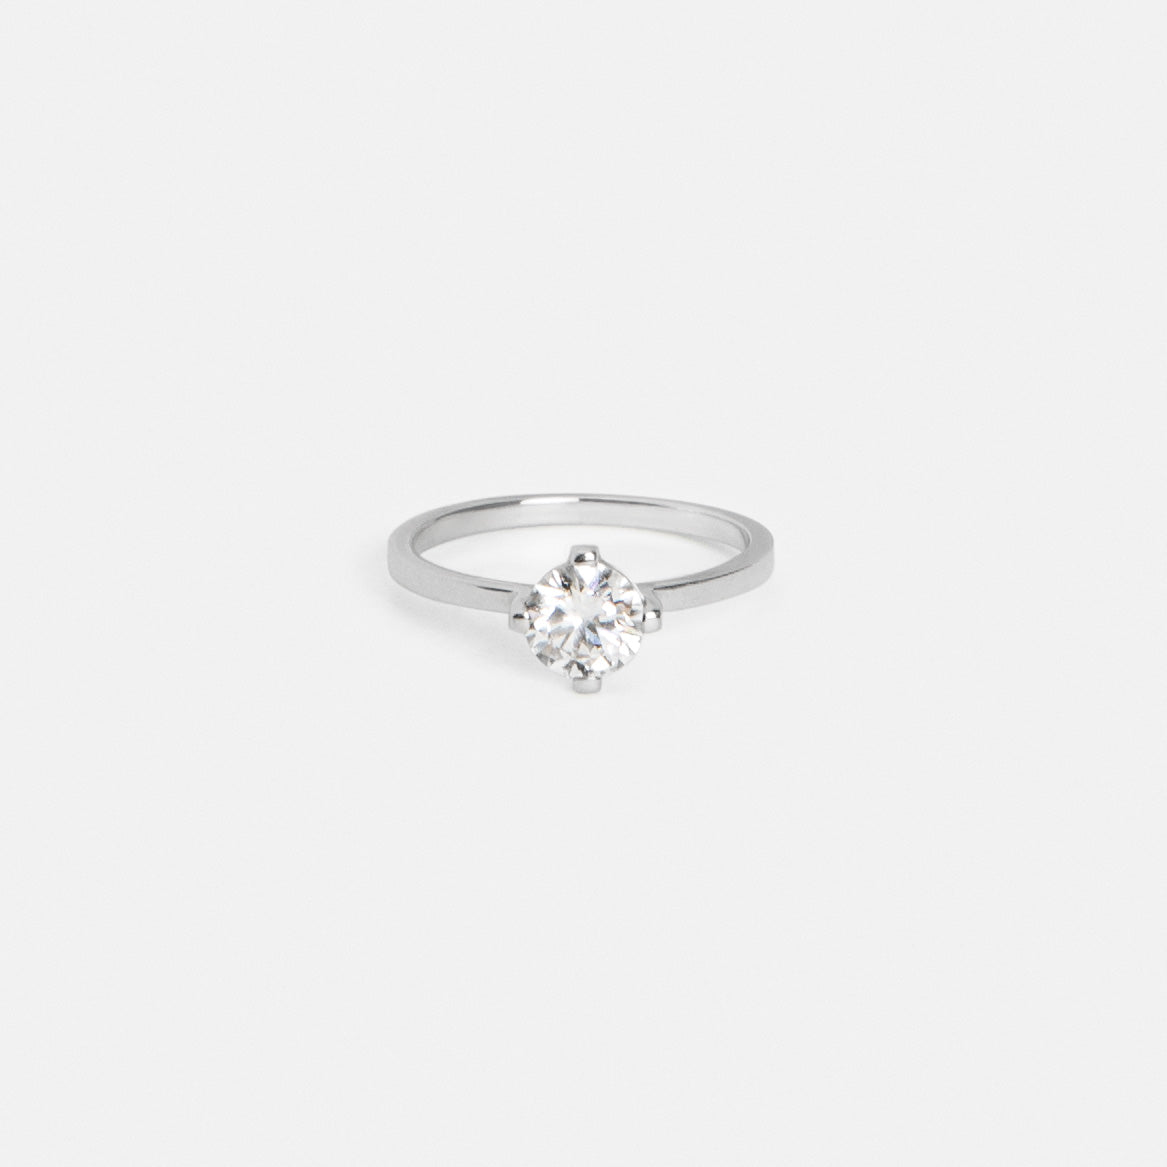 Ema Unisex Engagement Ring in Platinum Set With 1ct round brilliant cut natural diamond By SHW Fine Jewelry NYC